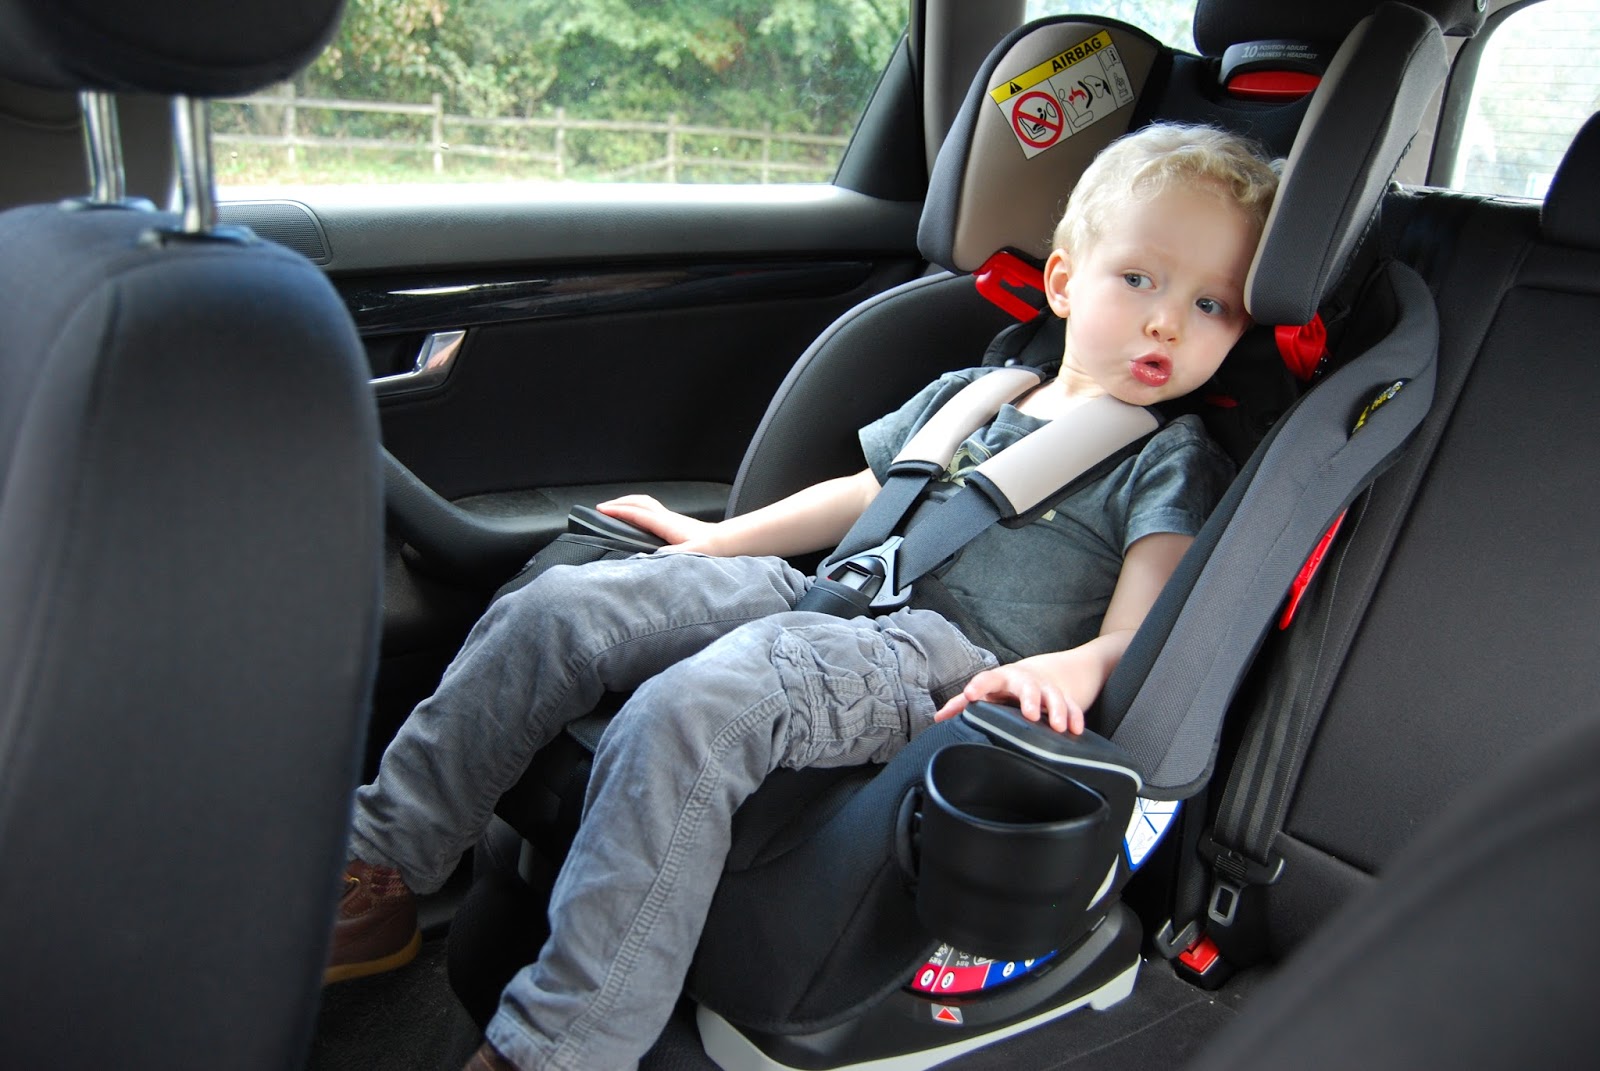  How To Assemble Graco Car Seat